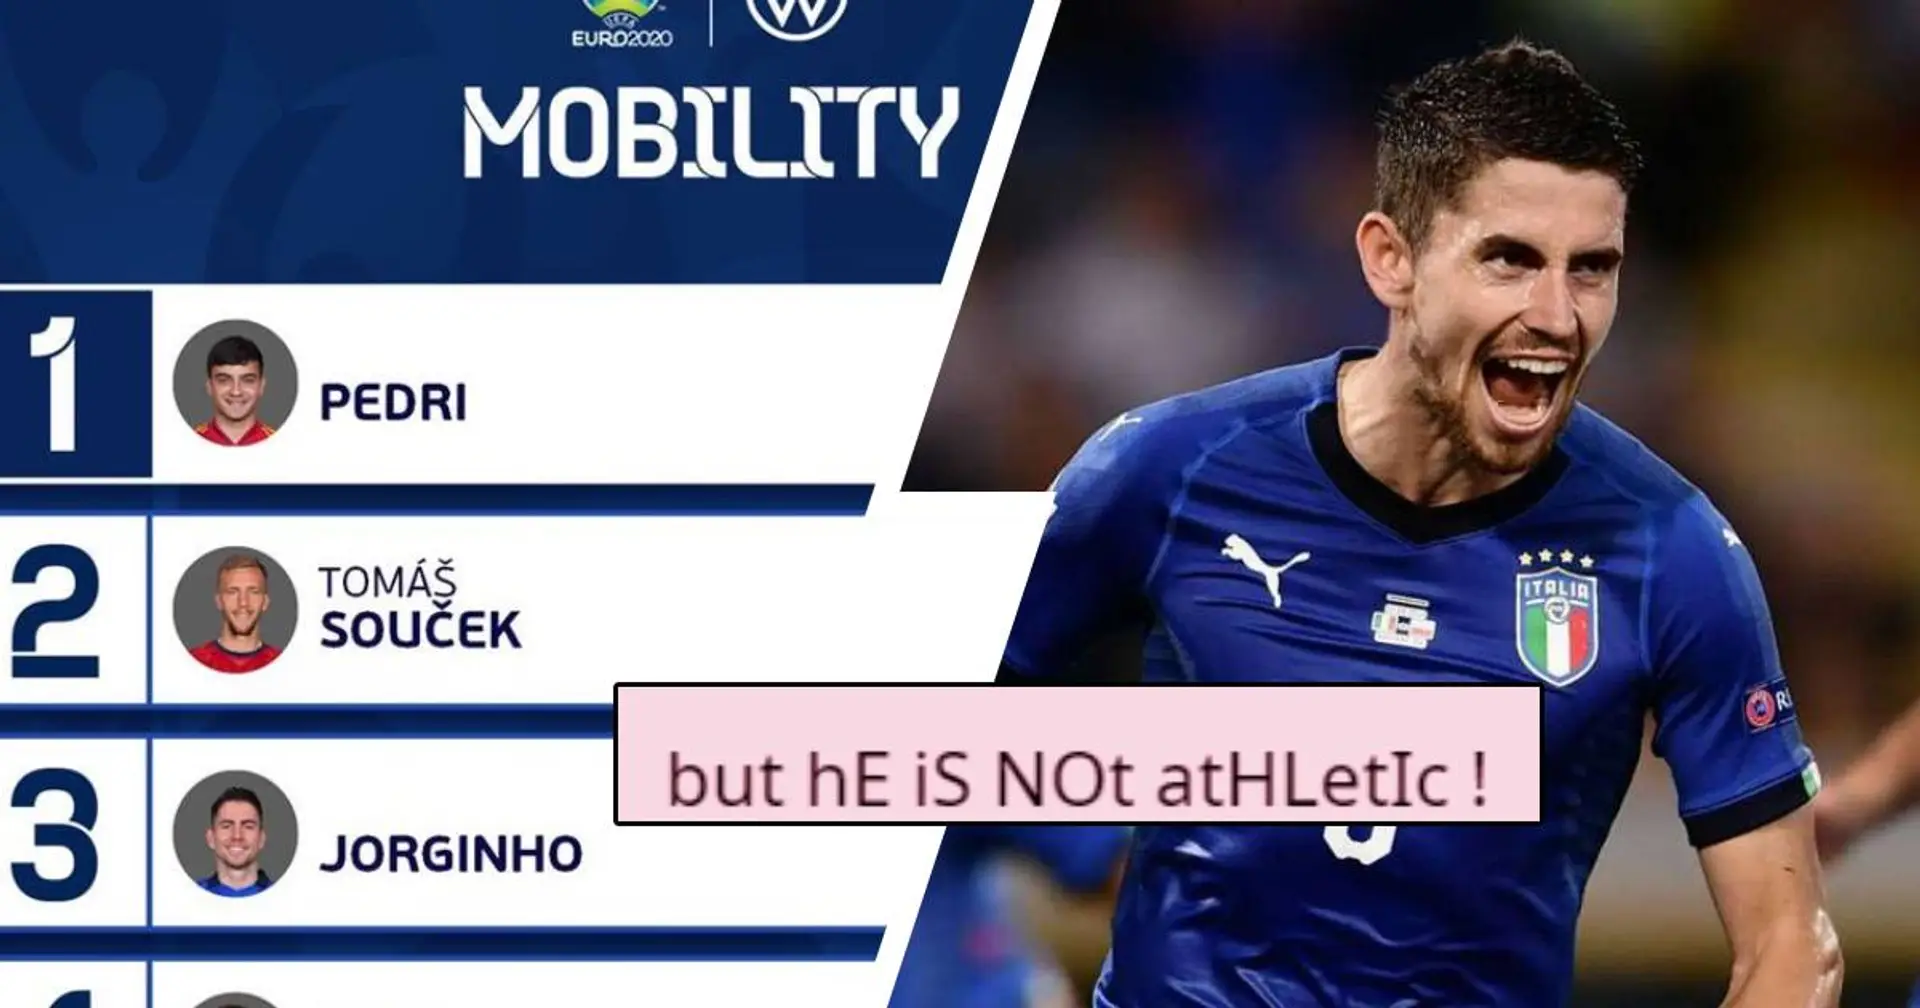 Jorginho ranks top 3 in important Euro stat category - disproves the 'he doesn't work hard' argument